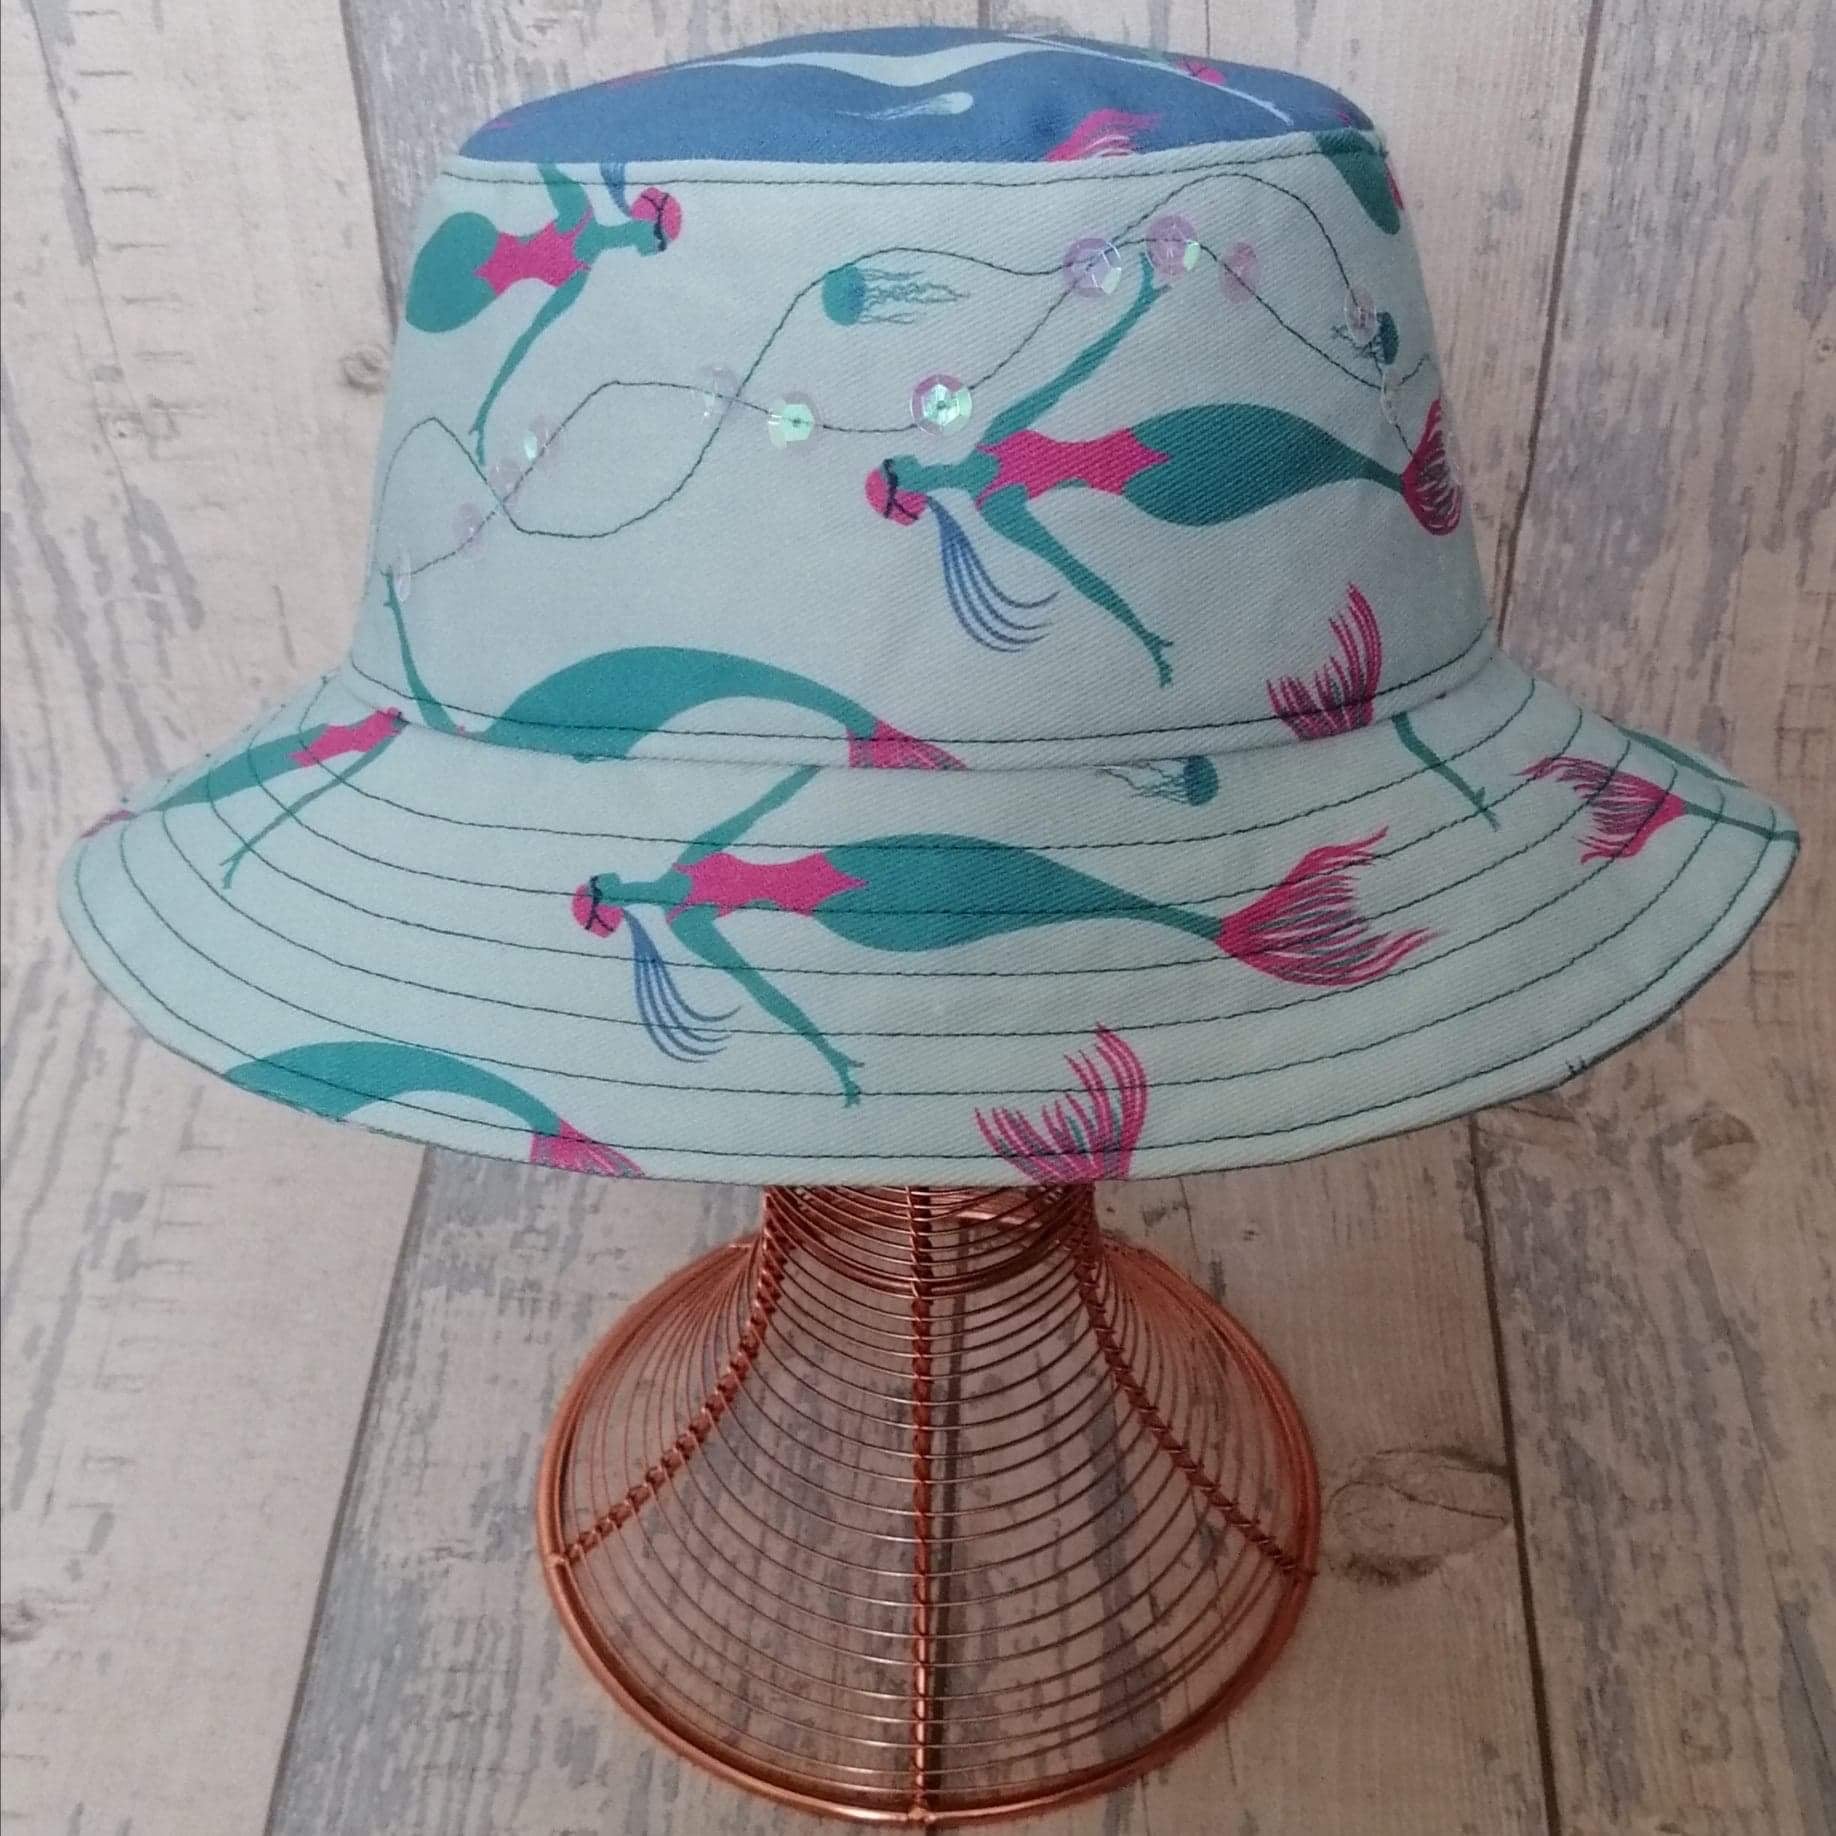 Reversible festival bucket hat. Blue and turquoise Swimming Mermaid design with sequins